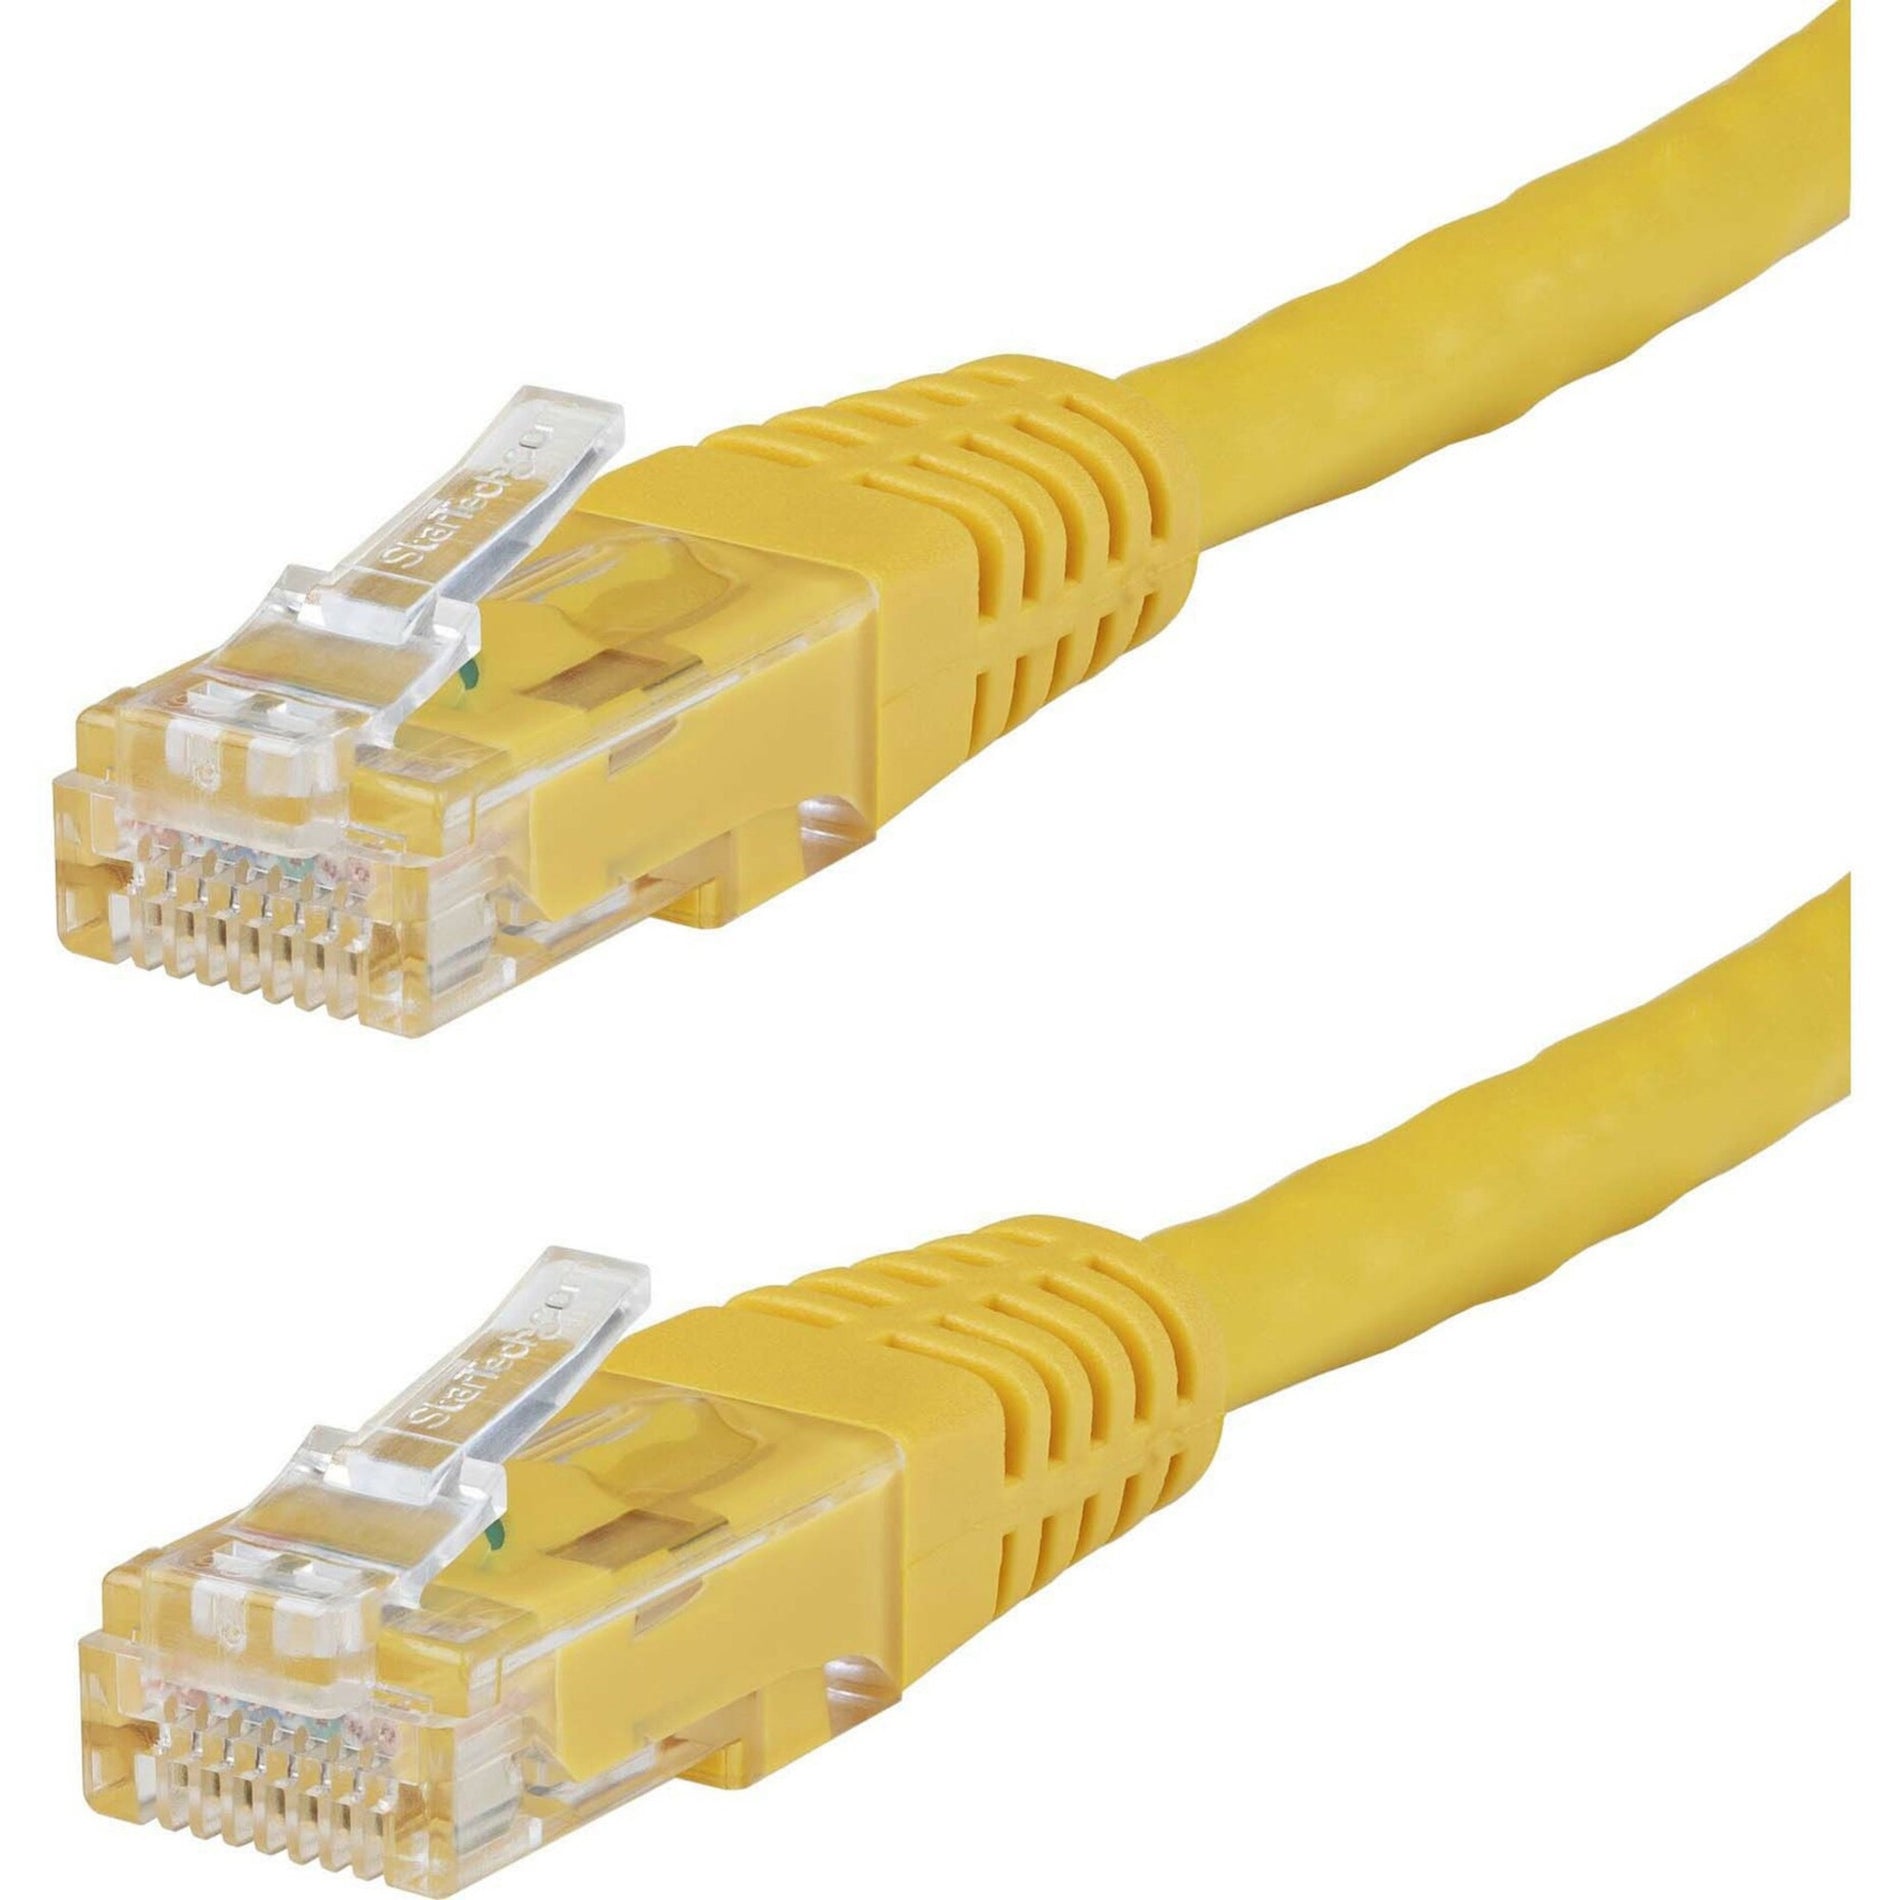 StarTech.com C6PATCH7YL 7ft Yellow Molded Cat6 UTP Patch Cable, ETL Verified, Lifetime Warranty, 10 Gbit/s Data Transfer Rate